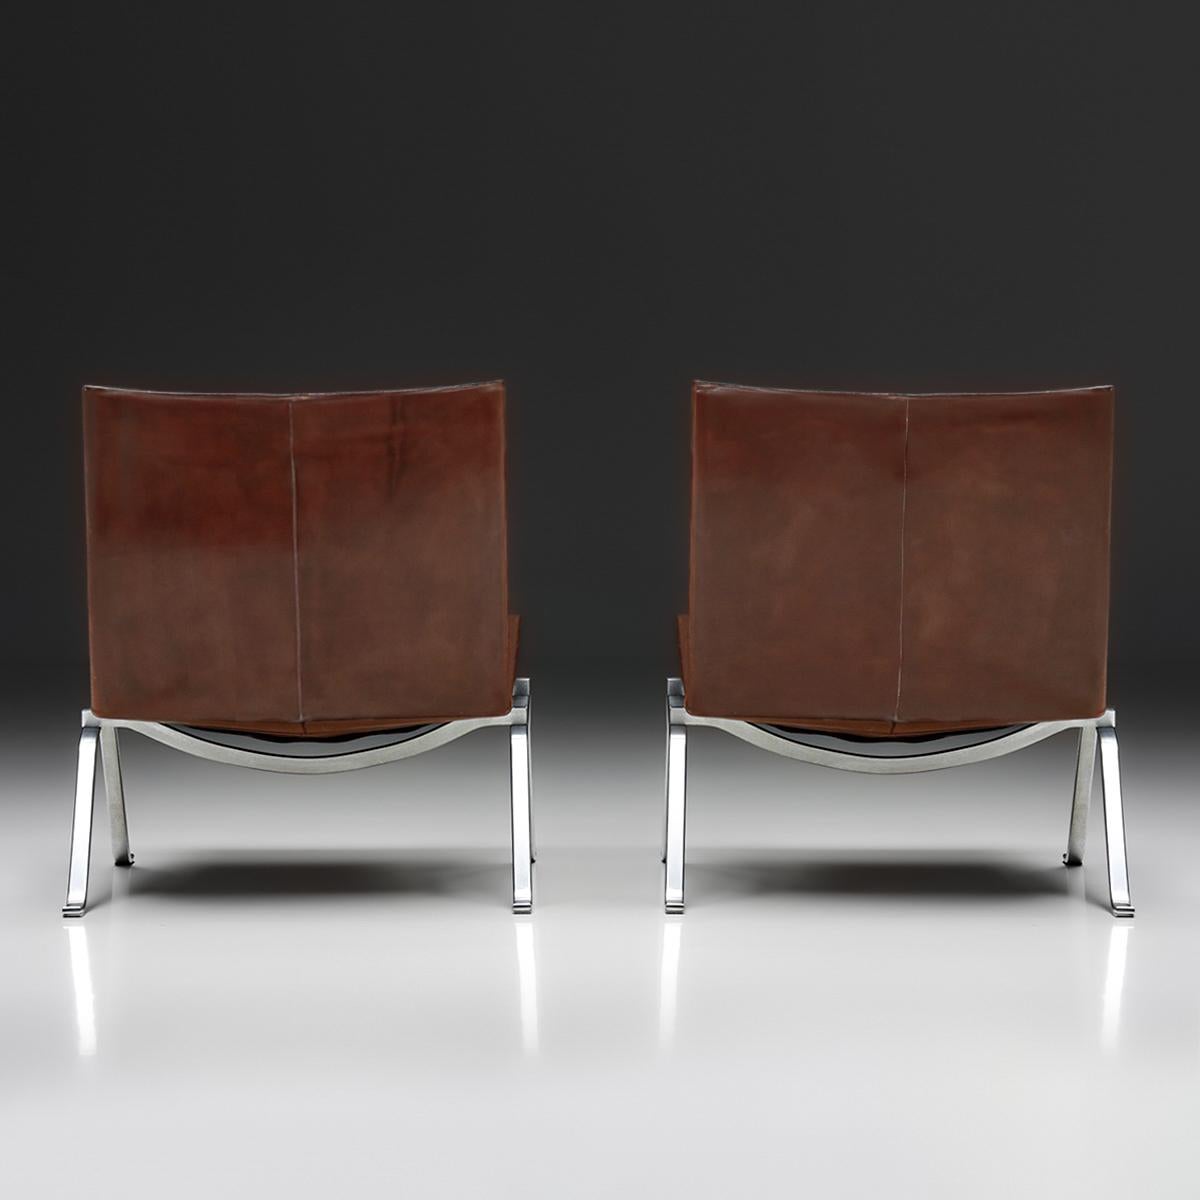 Pair of Poul Kjaerholm, E. Kold Christensen Steel and Leather PK22 Lounge Chairs 1